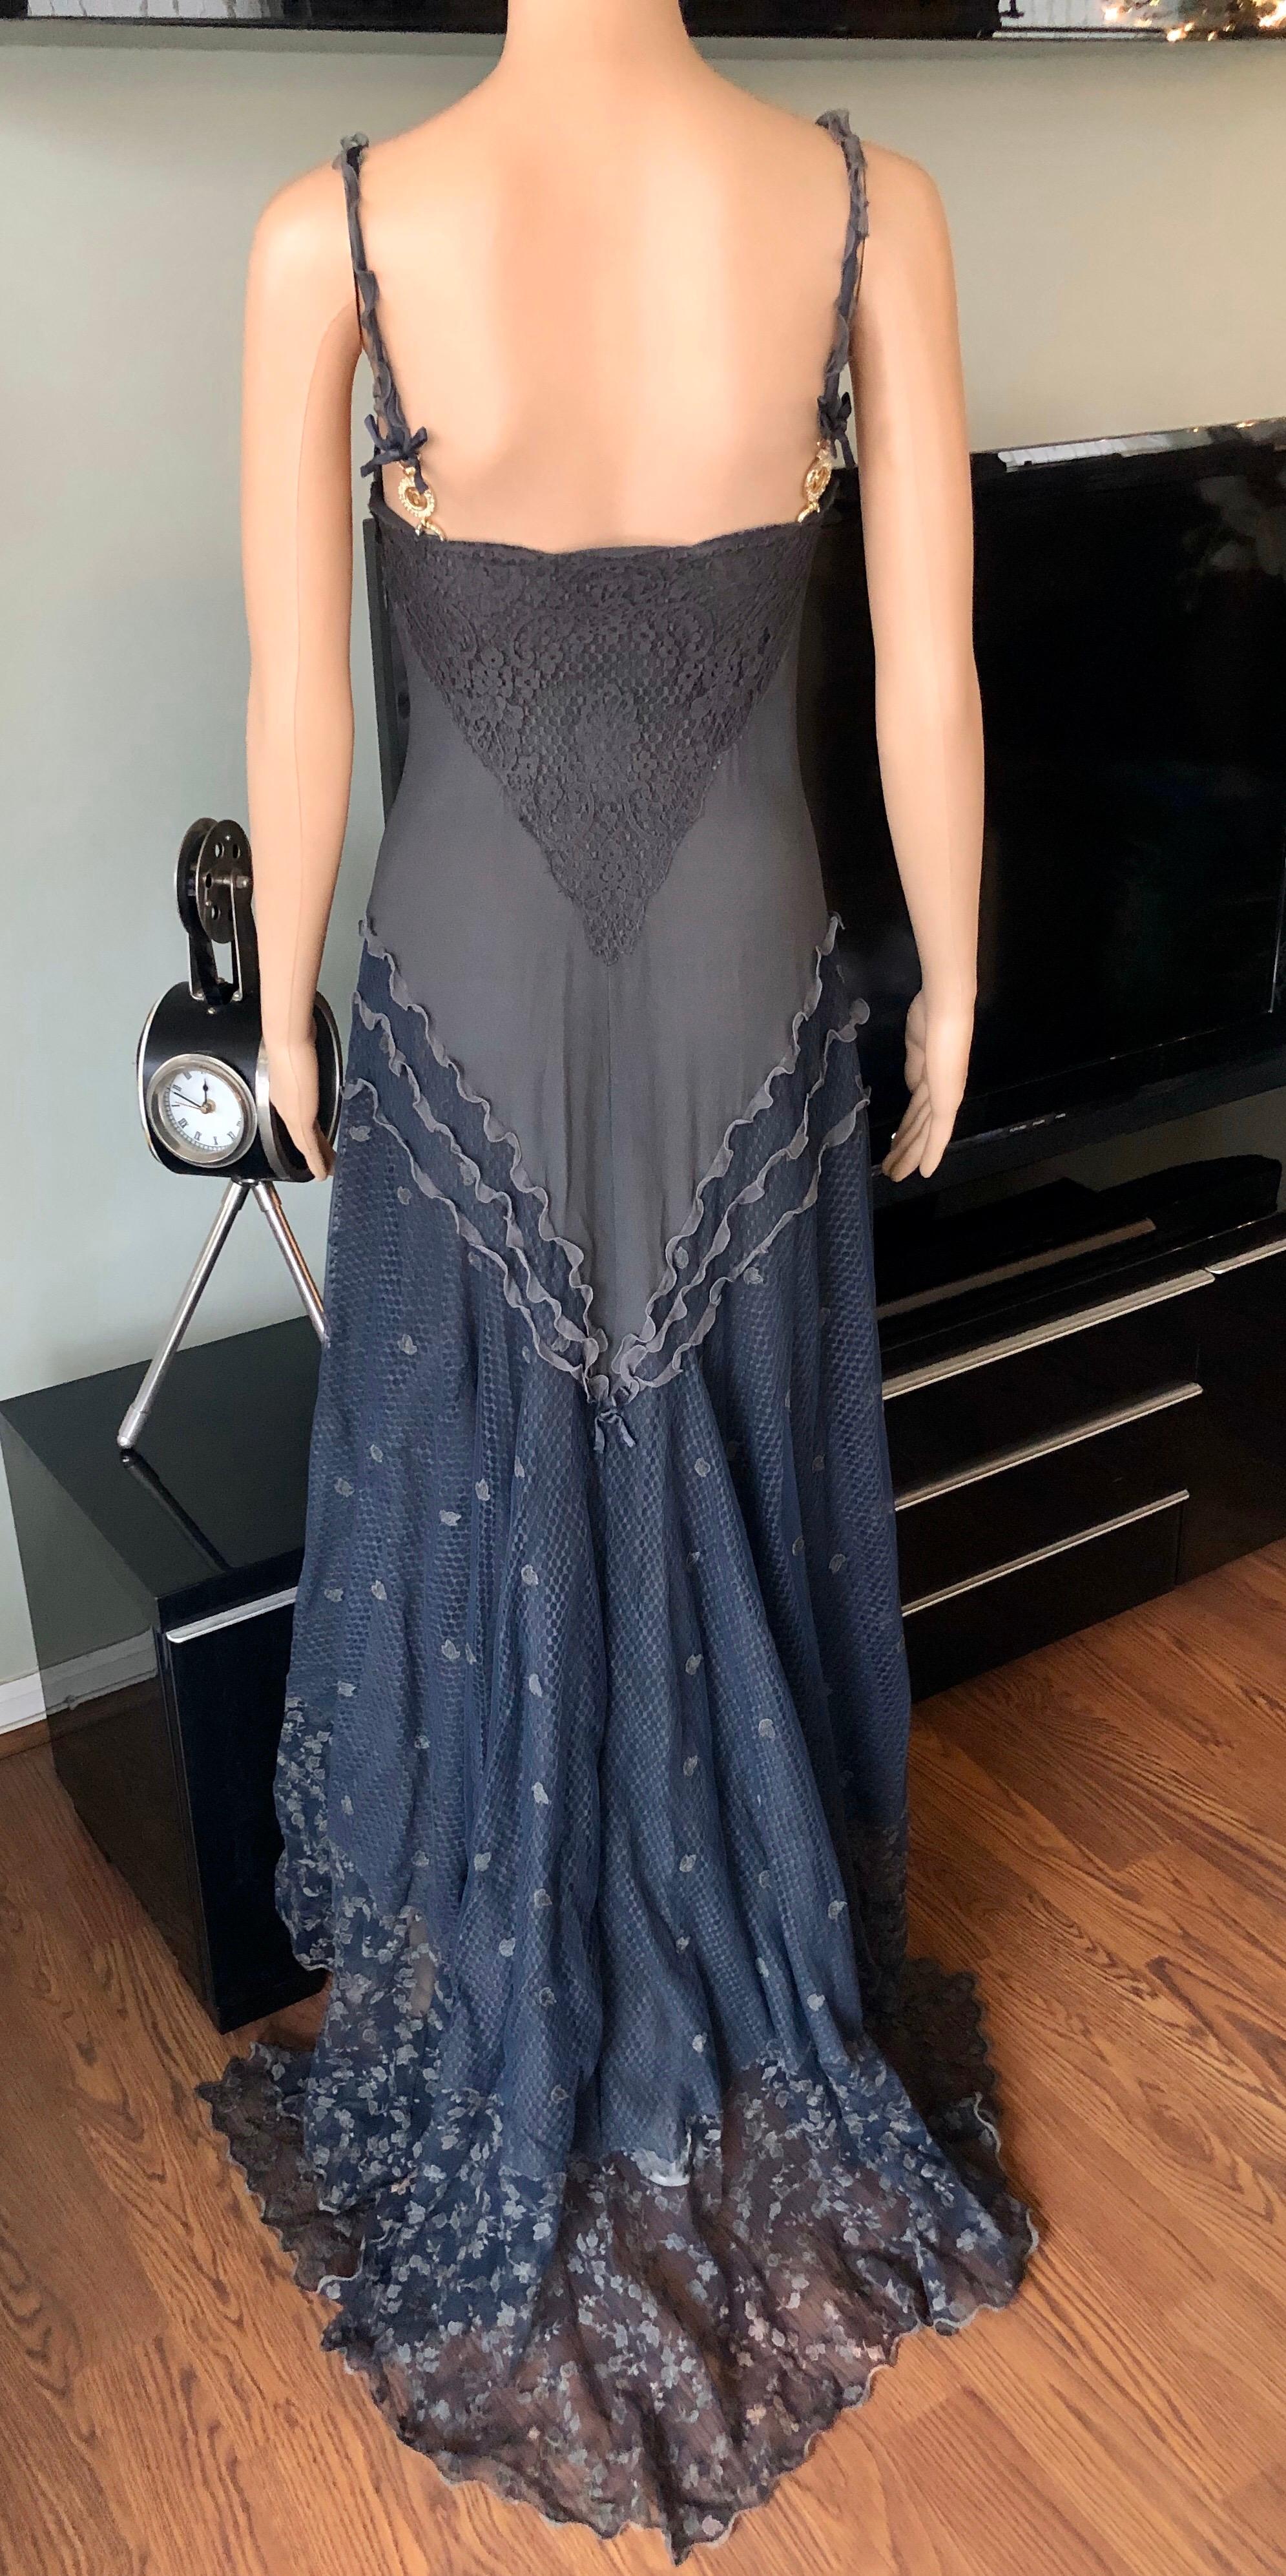 Gianni Versace S/S 1997 Runway Sheer Lace Panels Grey Evening Dress Gown For Sale 3